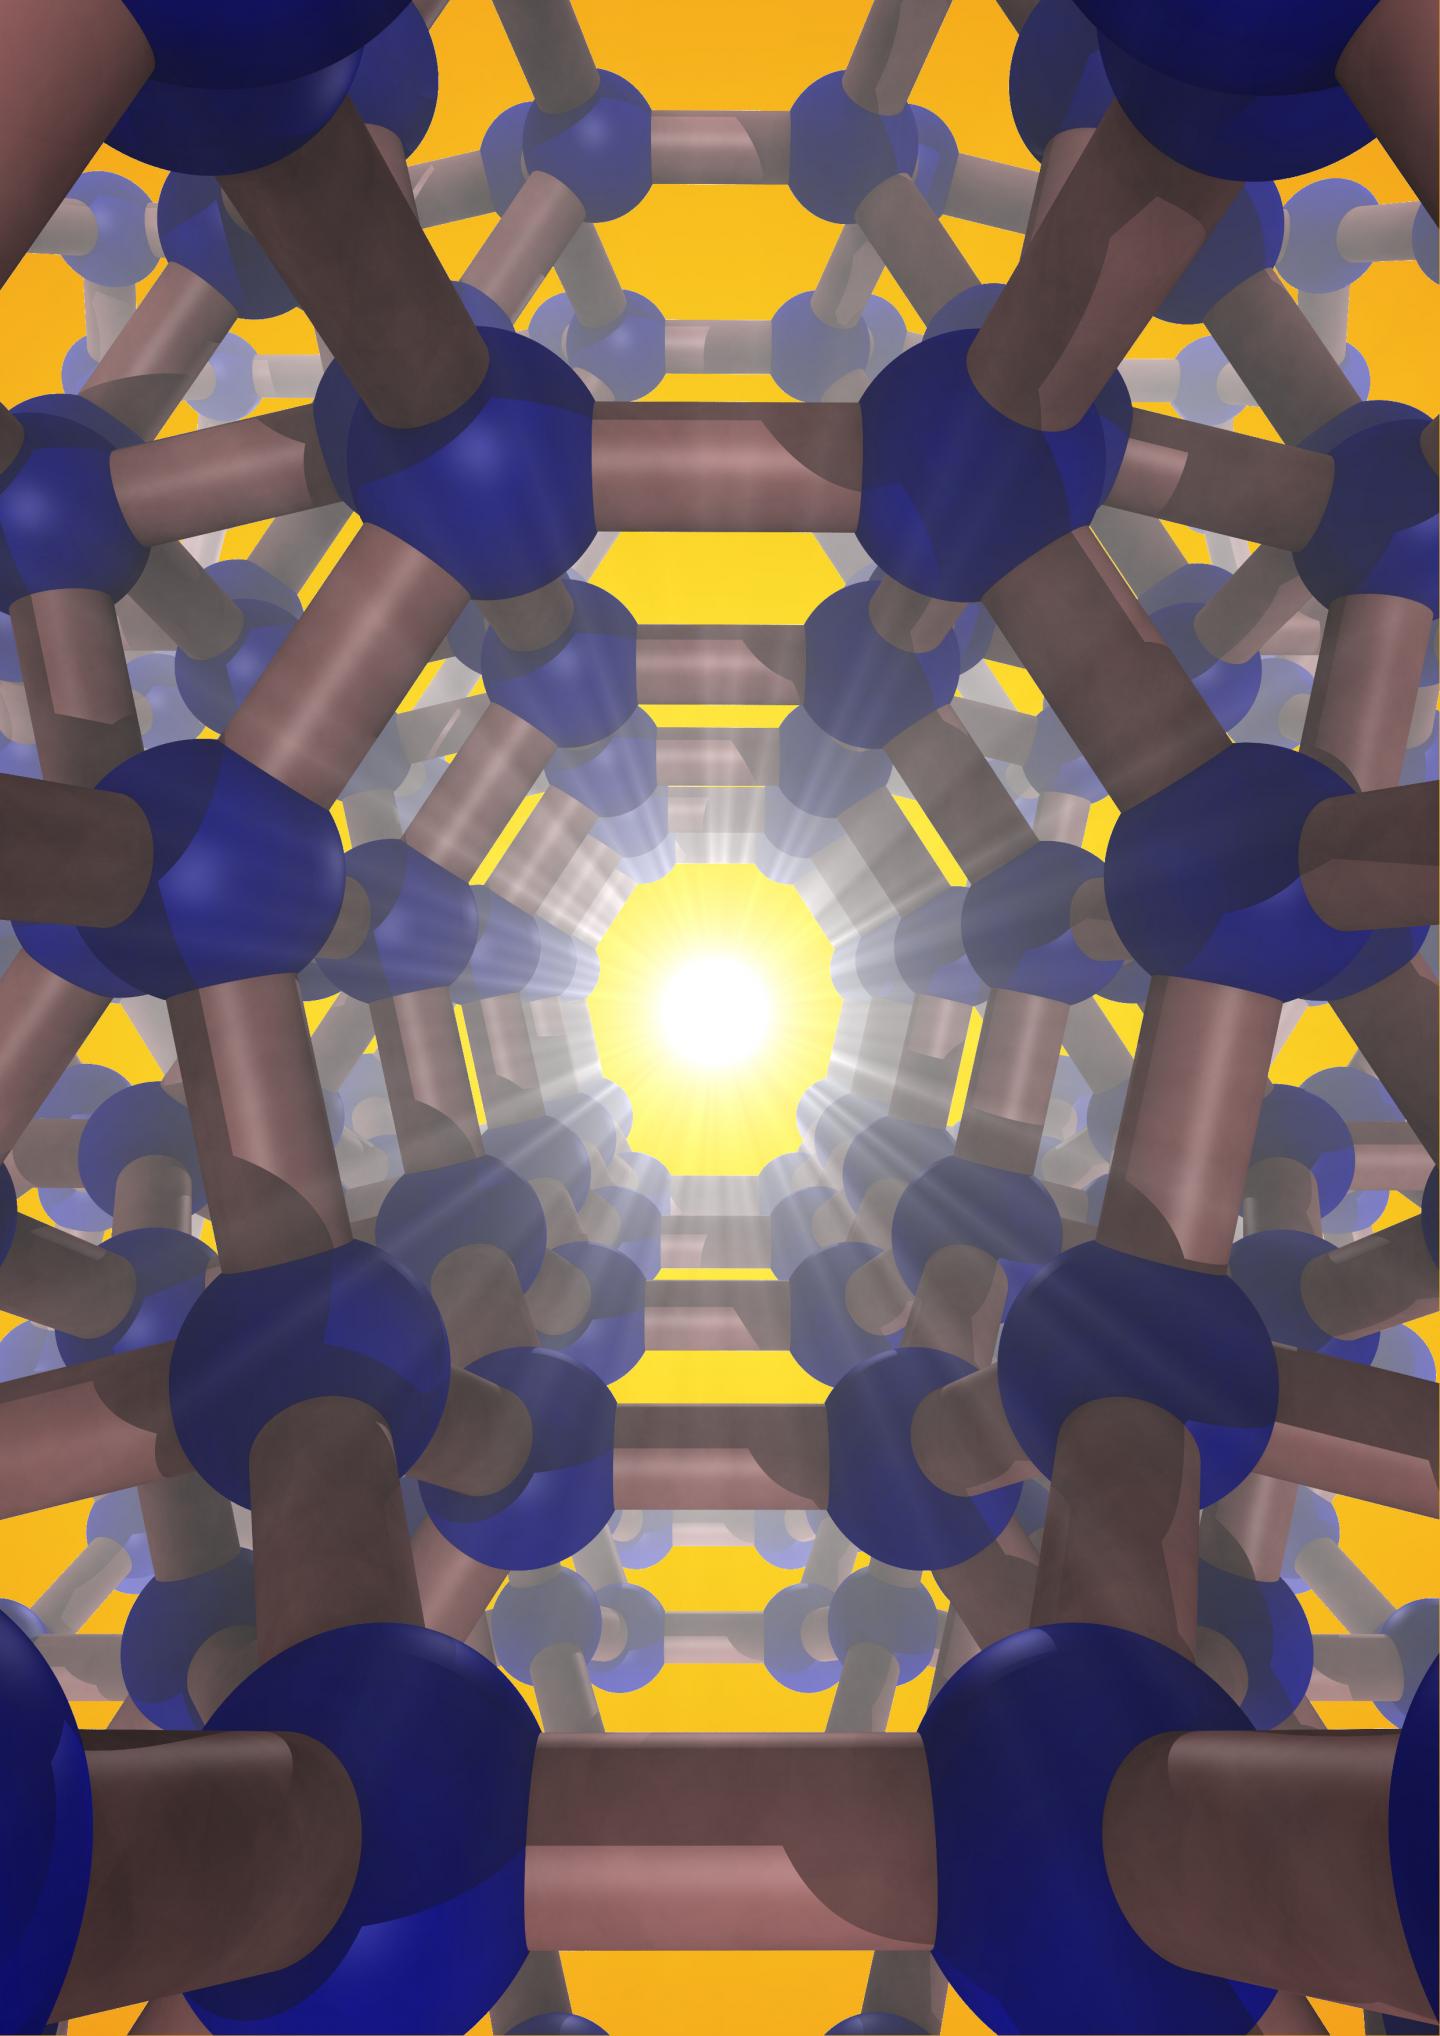 Silicon Allotrope Synthesized